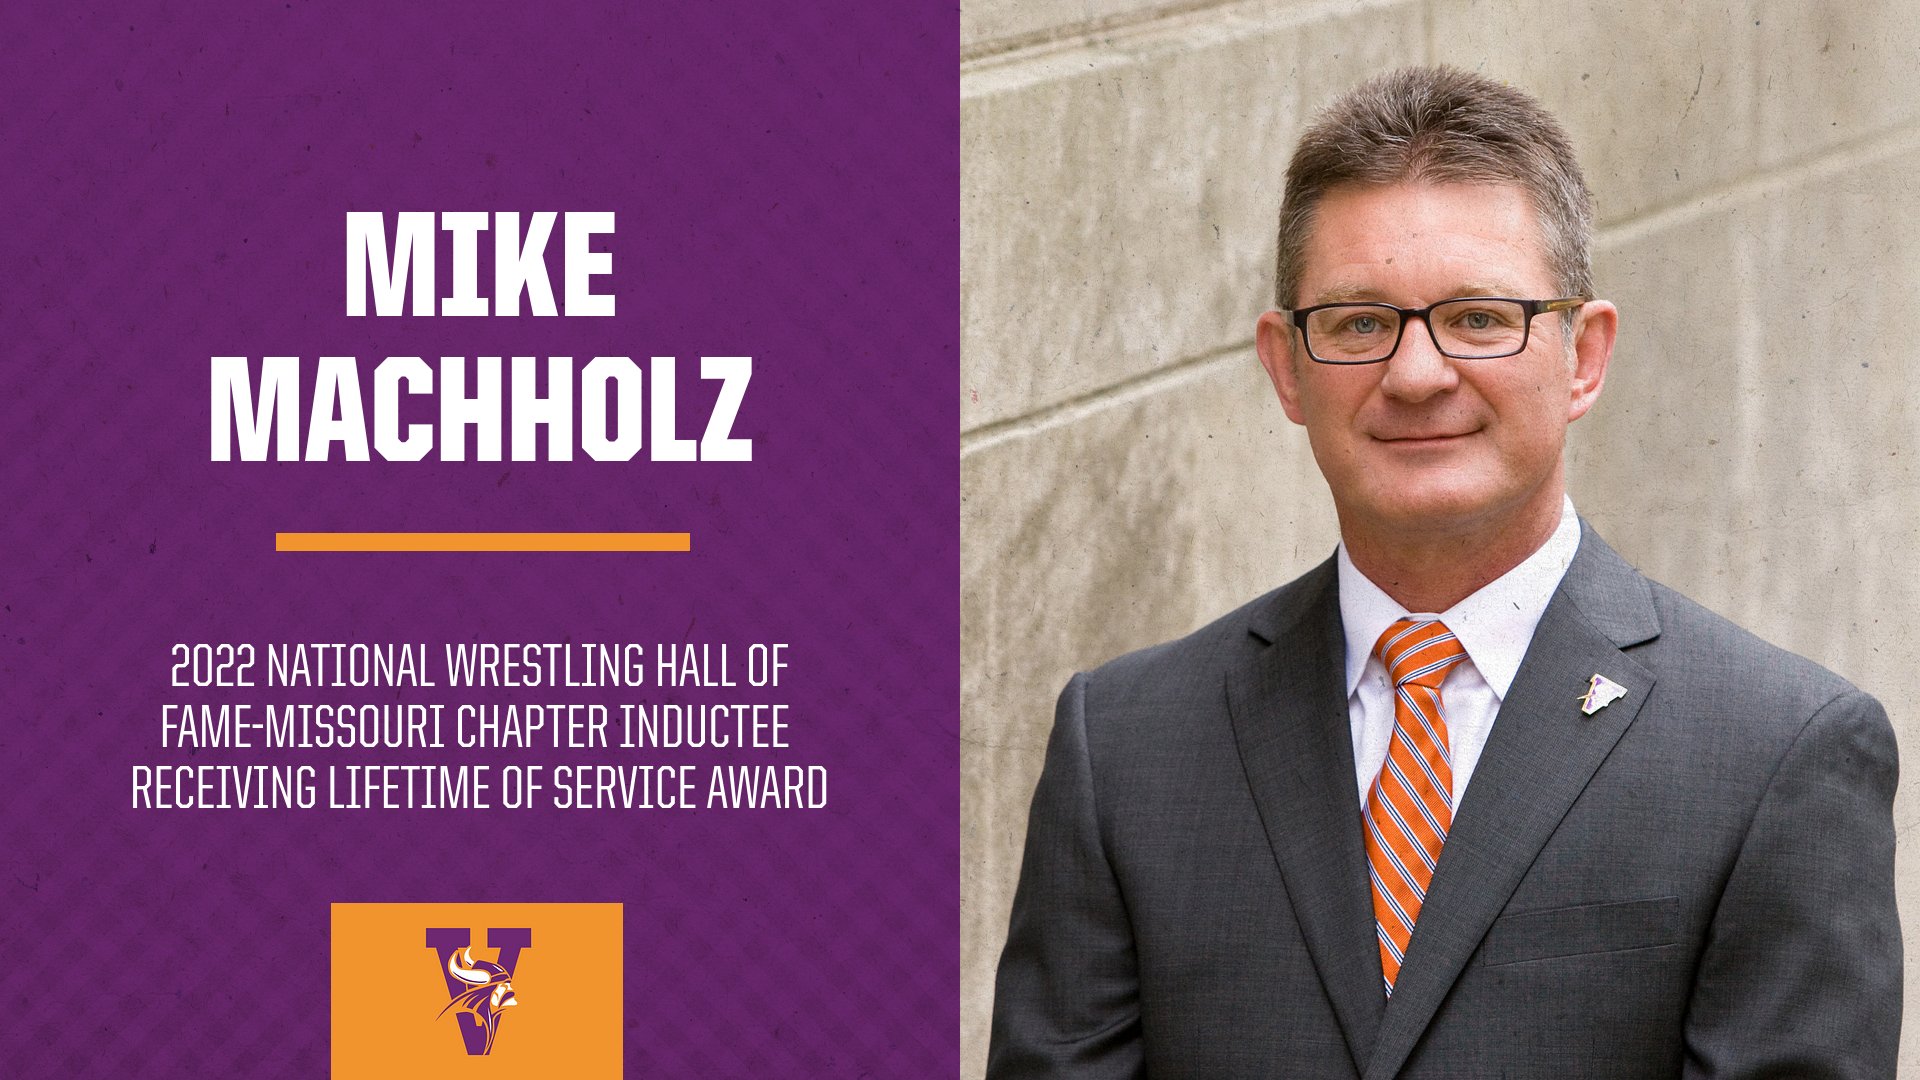 MISSOURI VALLEY COLLEGE ATHLETIC DIRECTOR, LONG-TIME MEN’S WRESTLING HEAD COACH SELECTED FOR NATIONAL WRESTLING HALL OF FAME